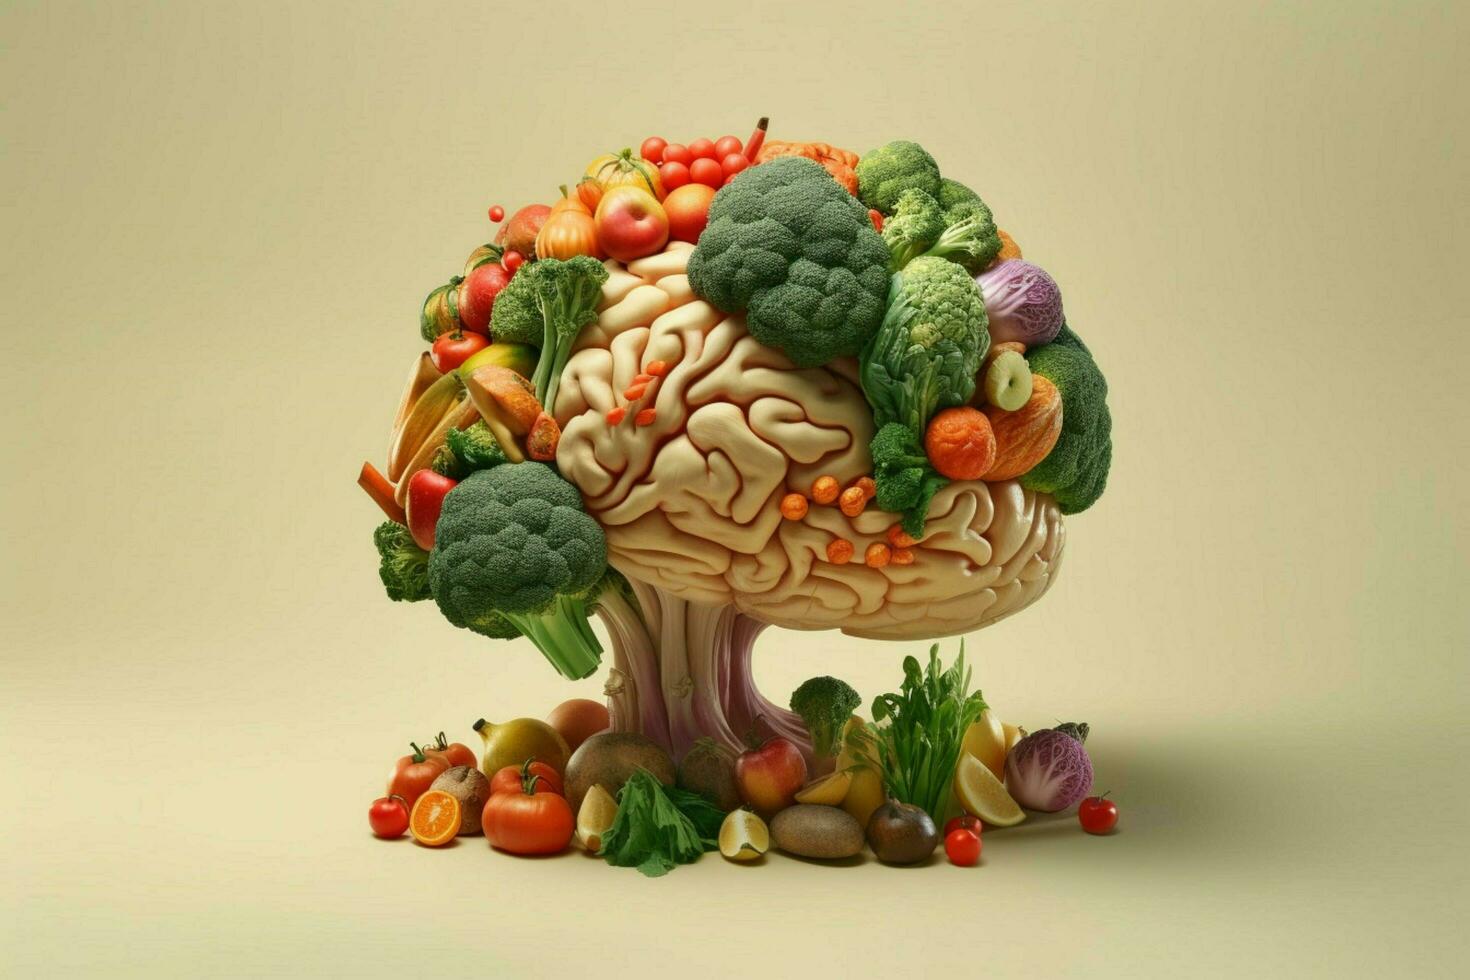 concept art of a brain made out of whole foods photo